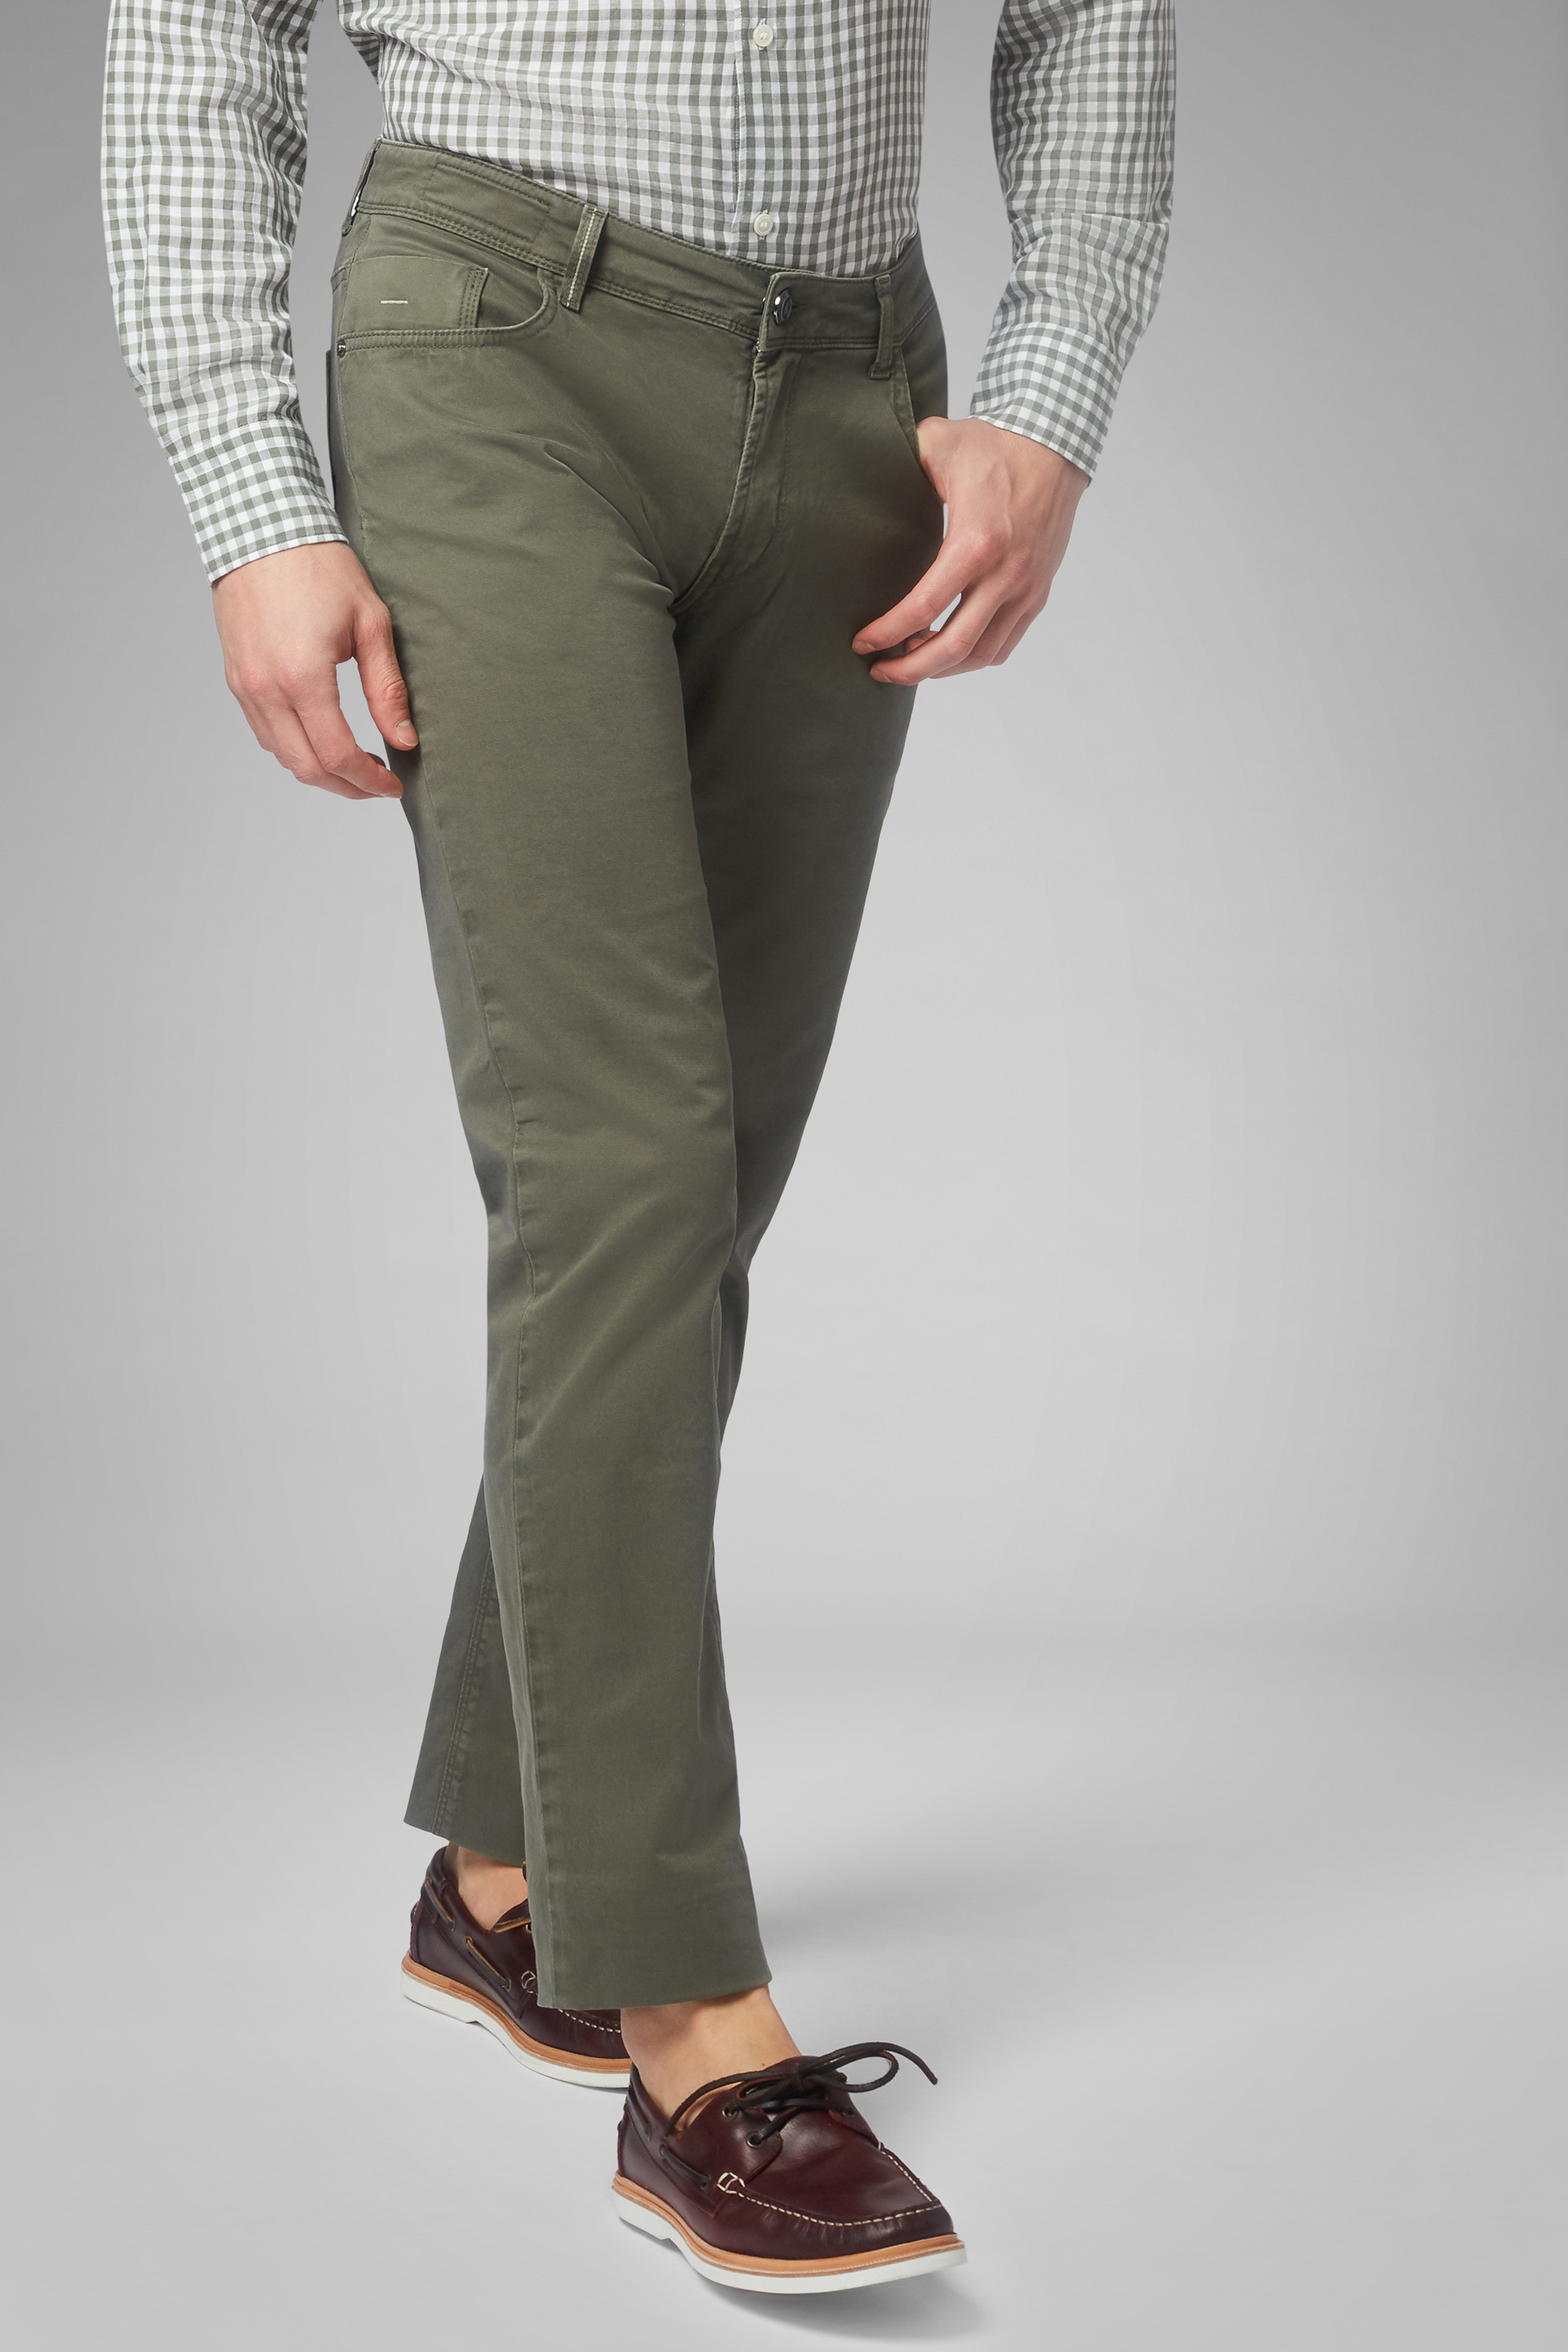 M5 slim five pocket trousers 6172  First For Men